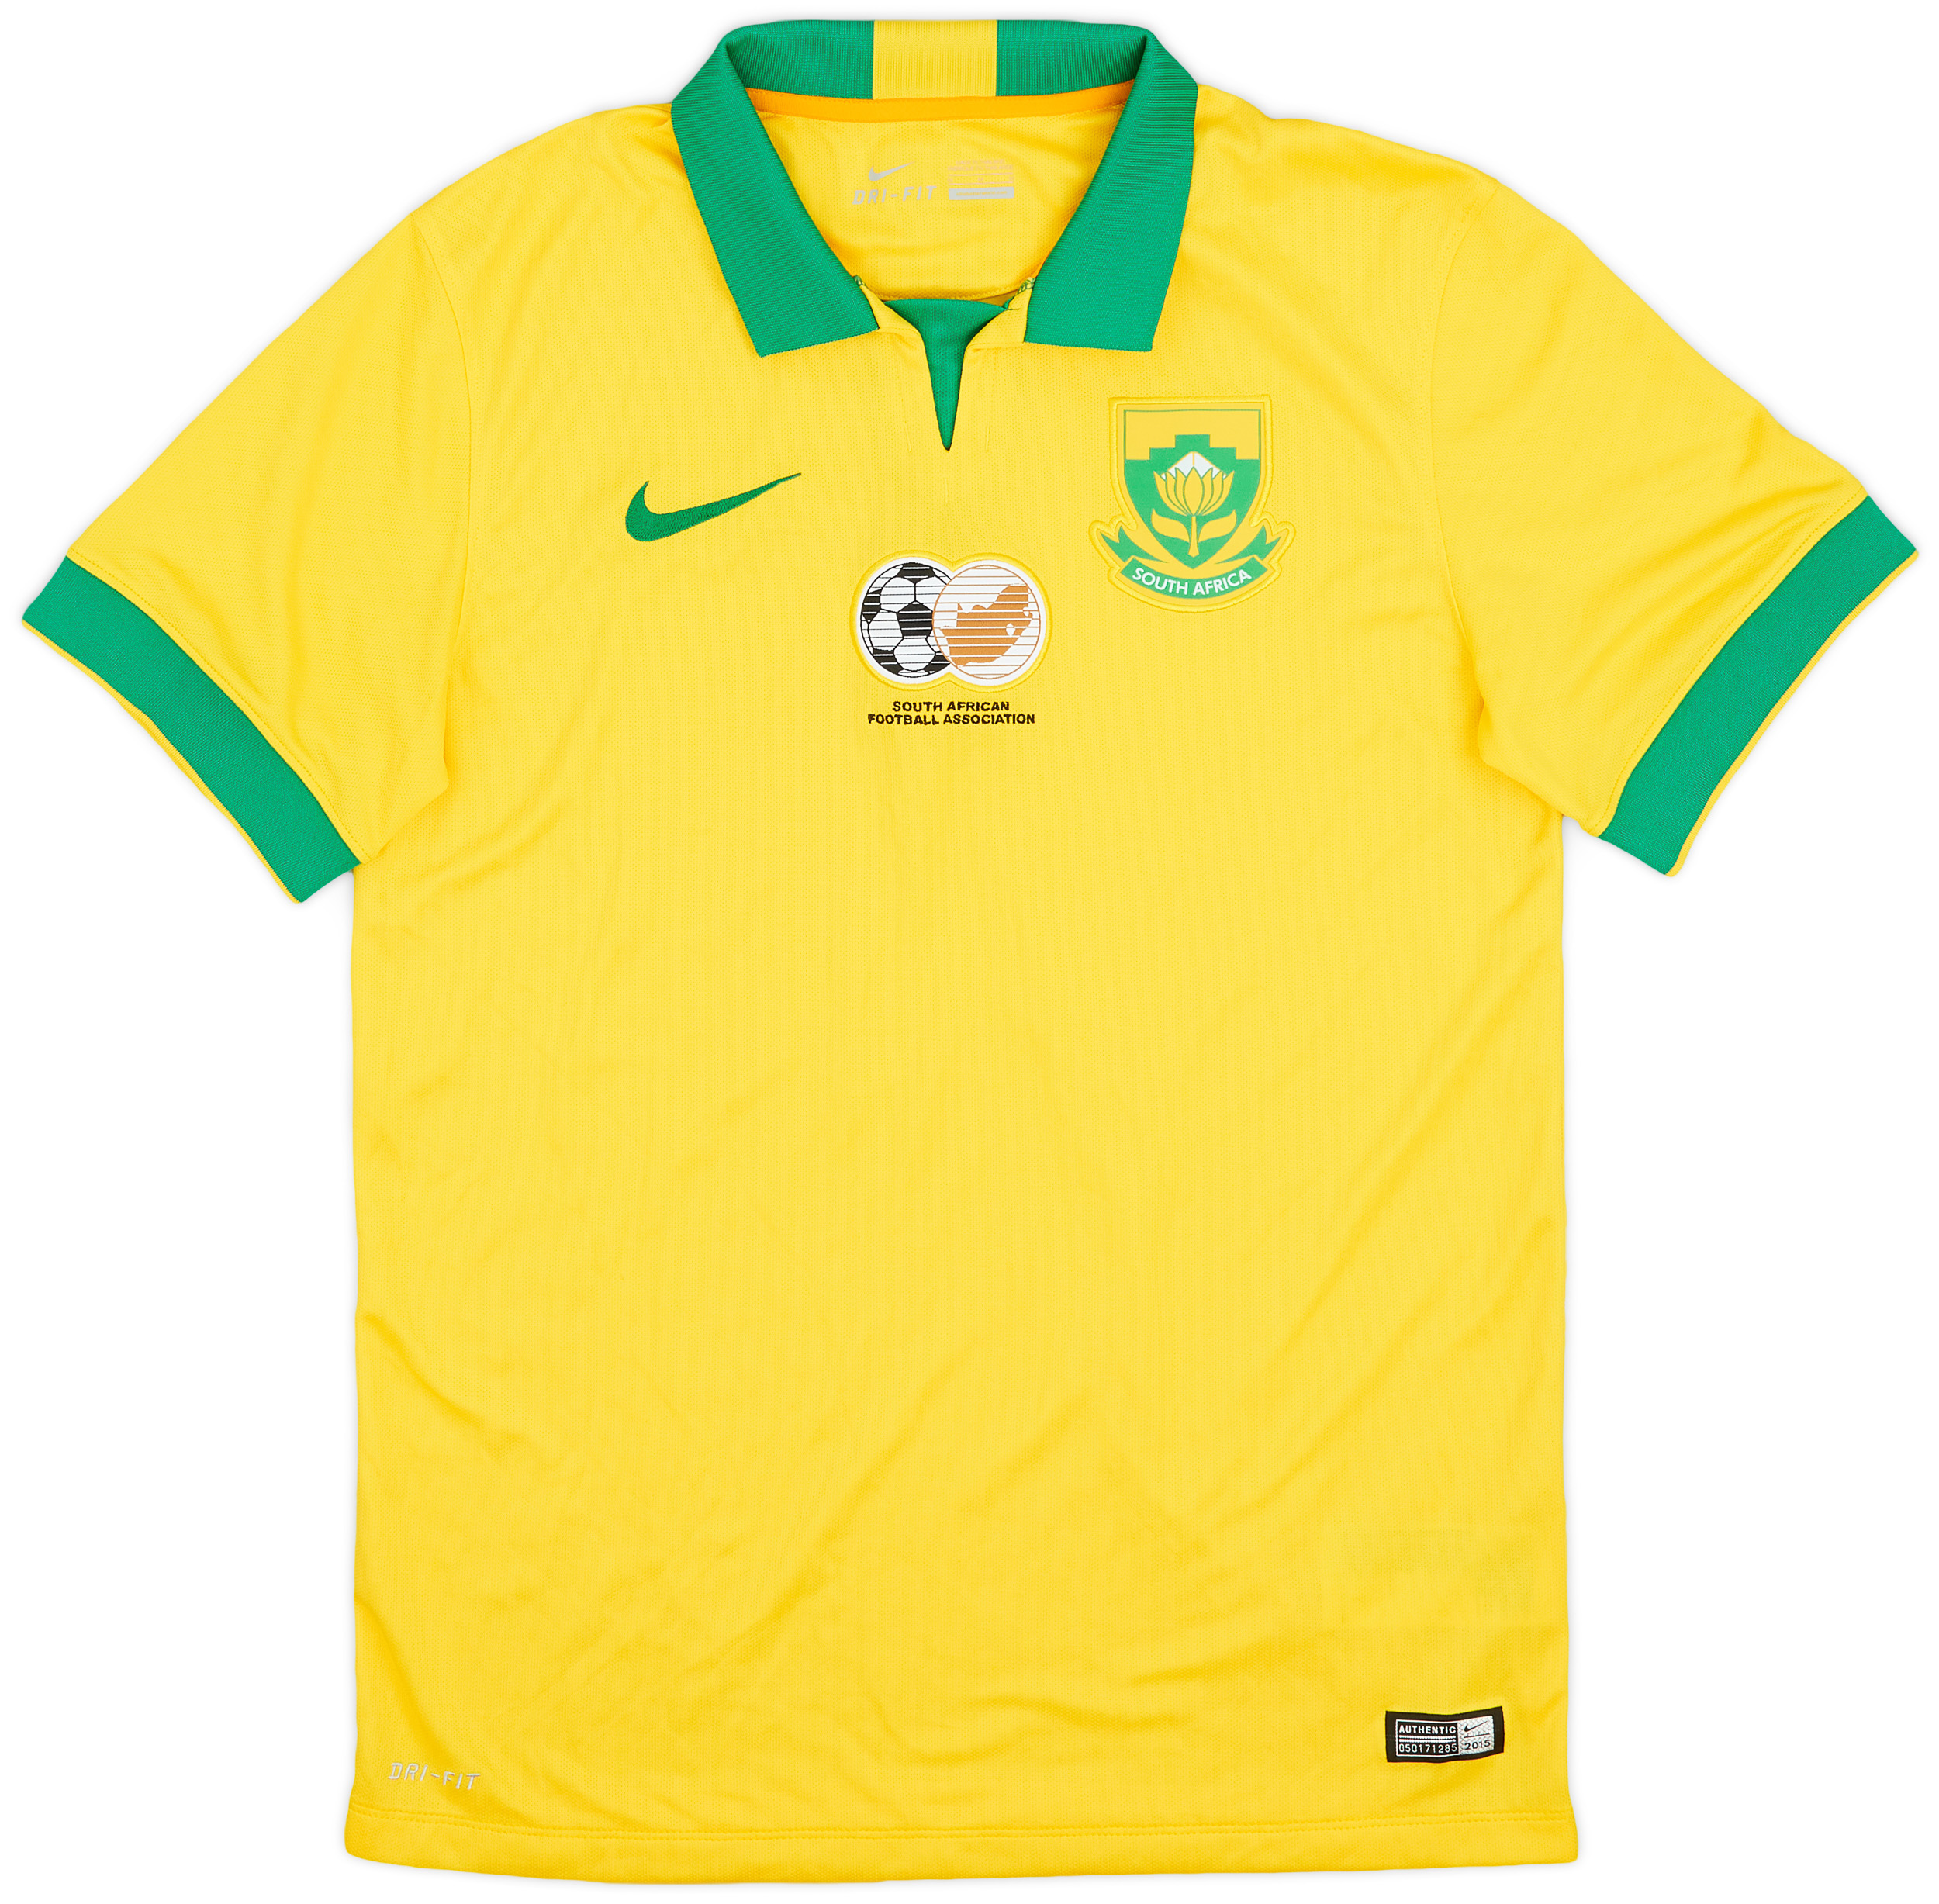 2015-16 South Africa Home Shirt - 9/10 - ()